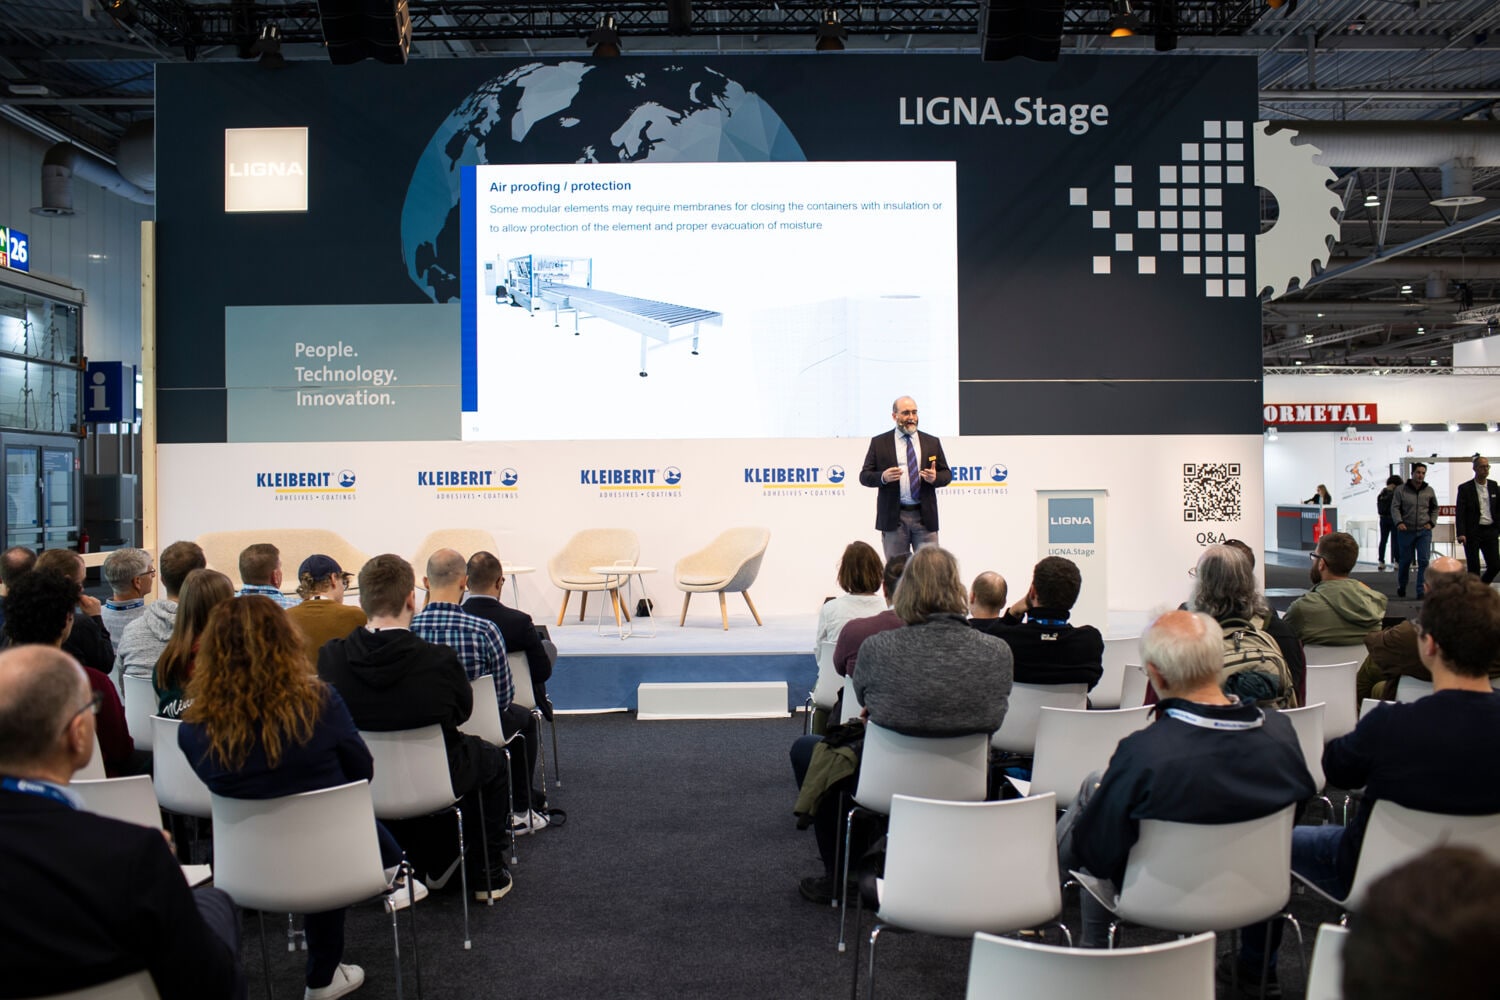 Can we construct a building as we produce furniture? The answer to Ligna.Stage